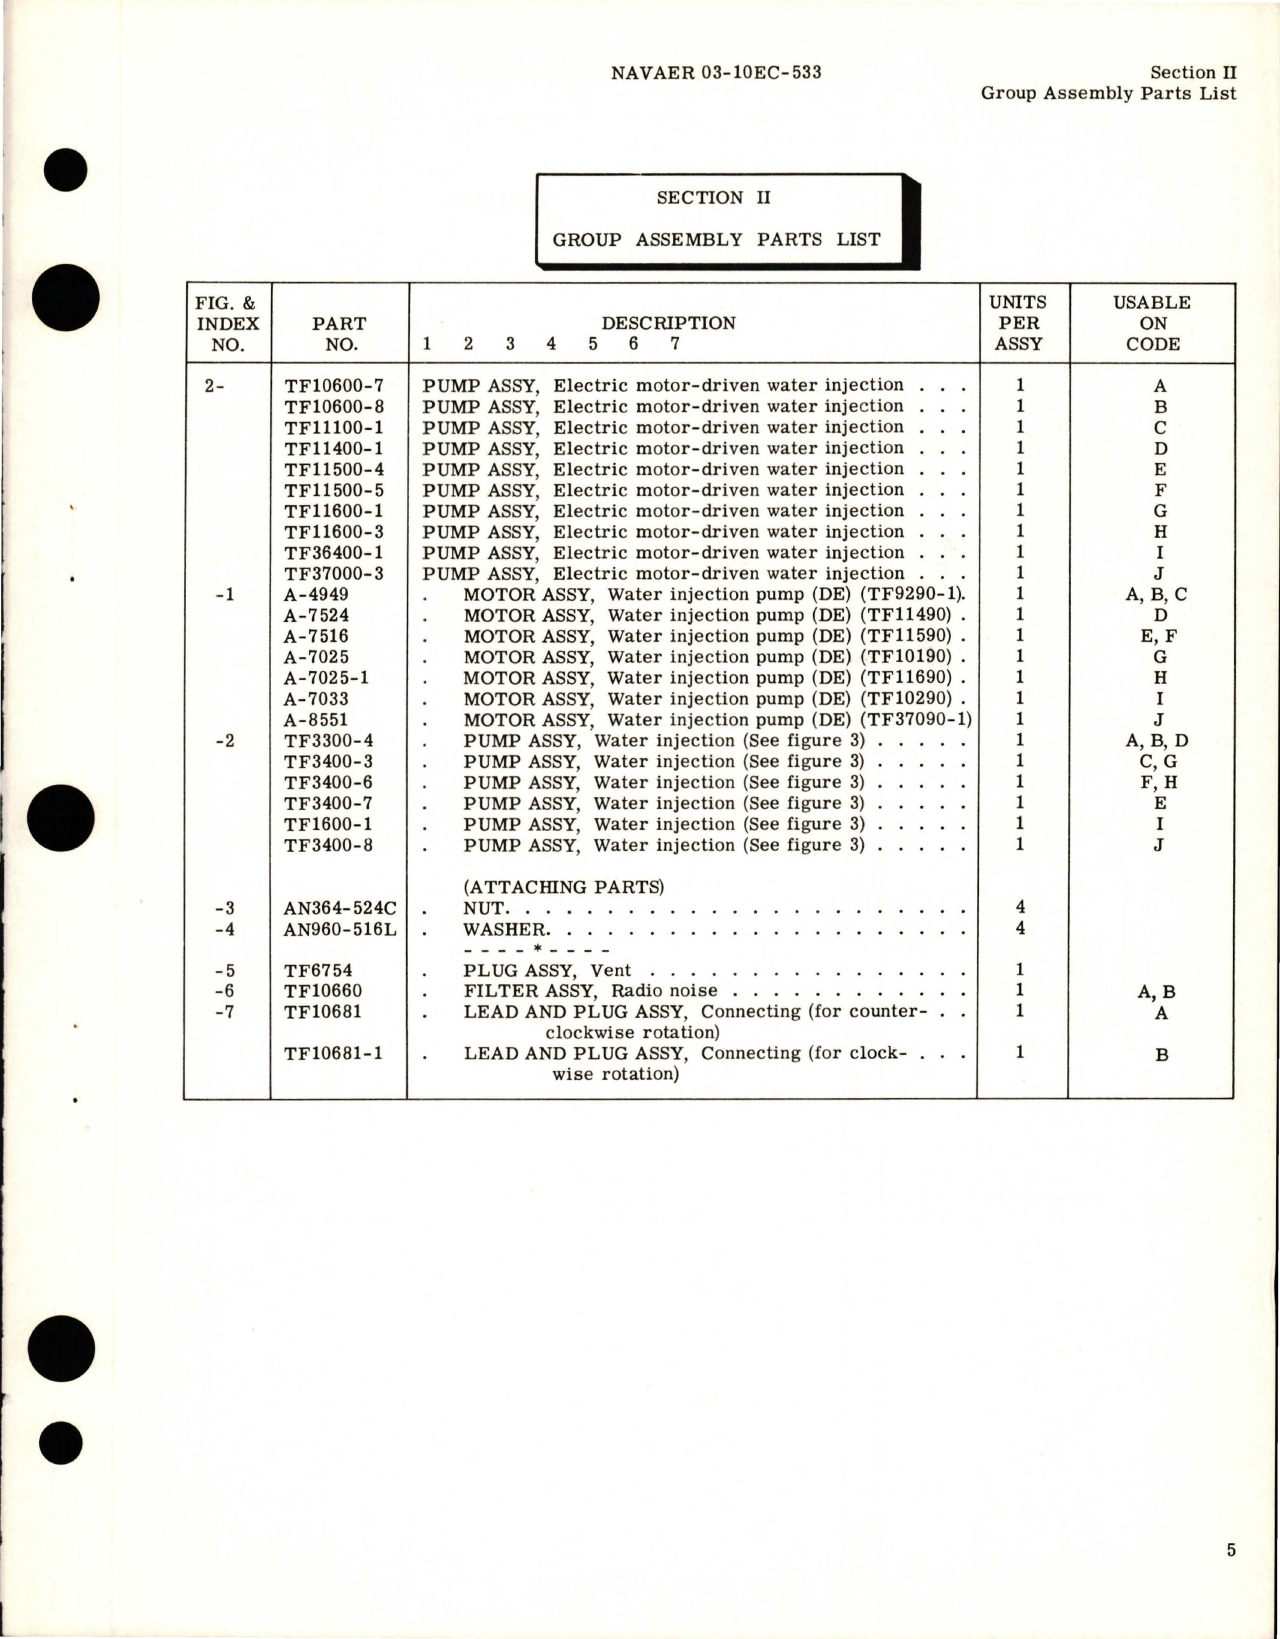 Sample page 7 from AirCorps Library document: Illustrated Parts Breakdown for Electric Motor Driven Water Injection Pumps